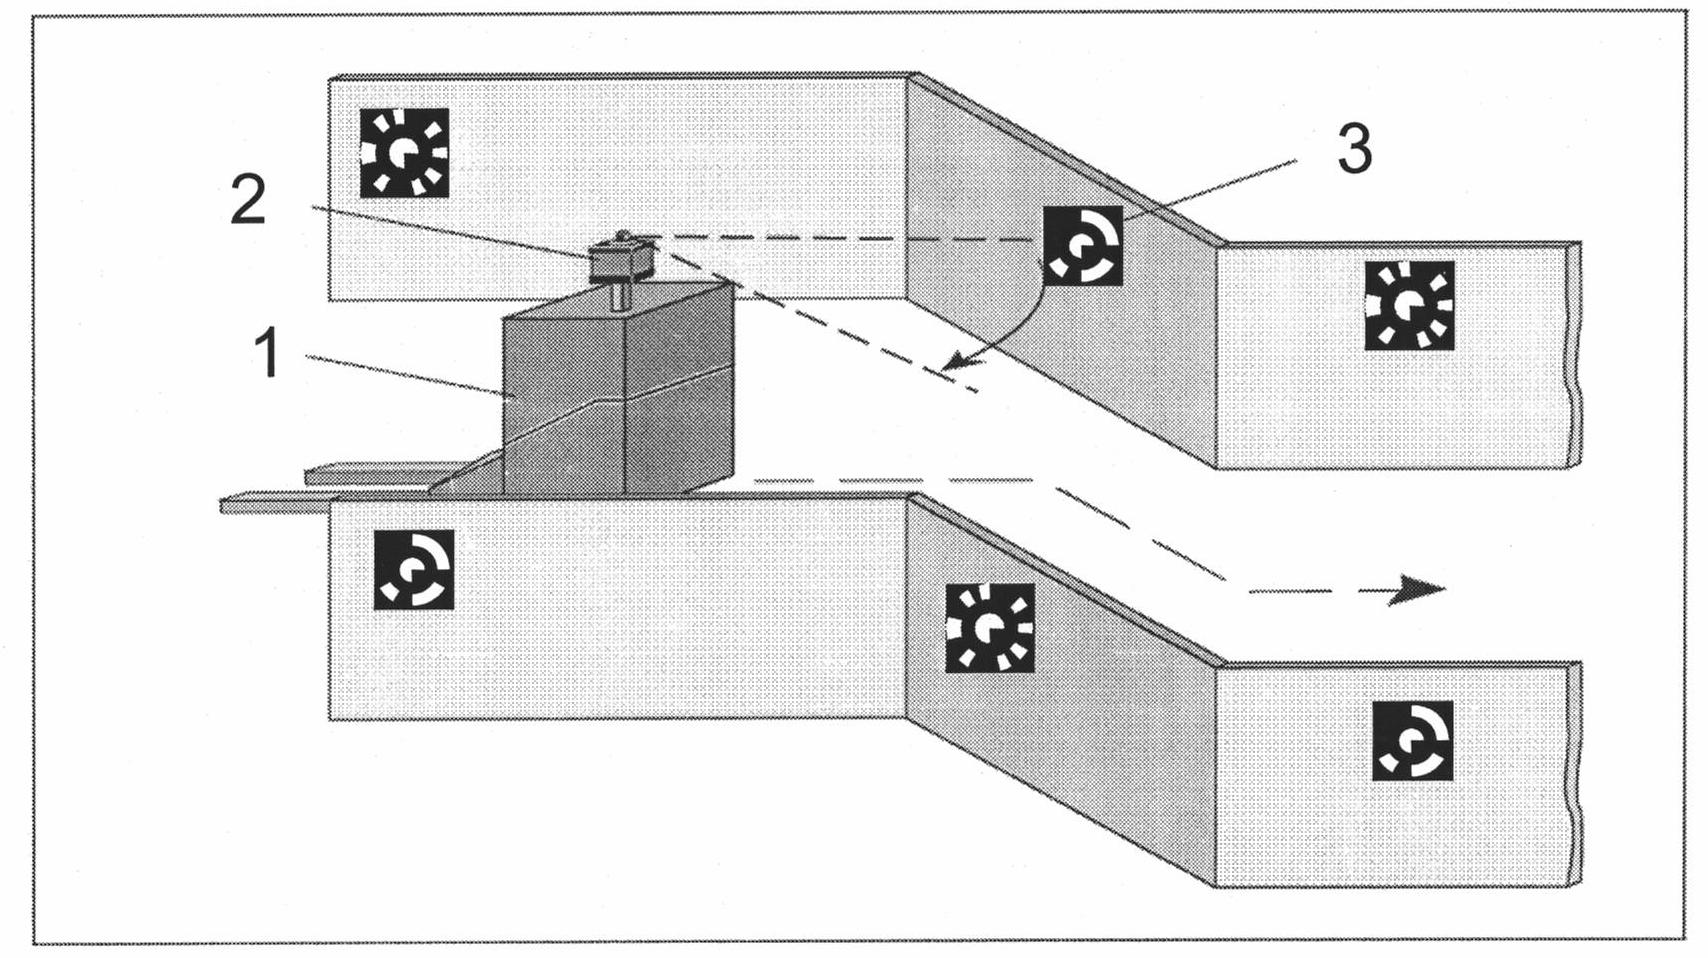 Underground space high-precision positioning method based on laser scanning and sequence encoded graphics